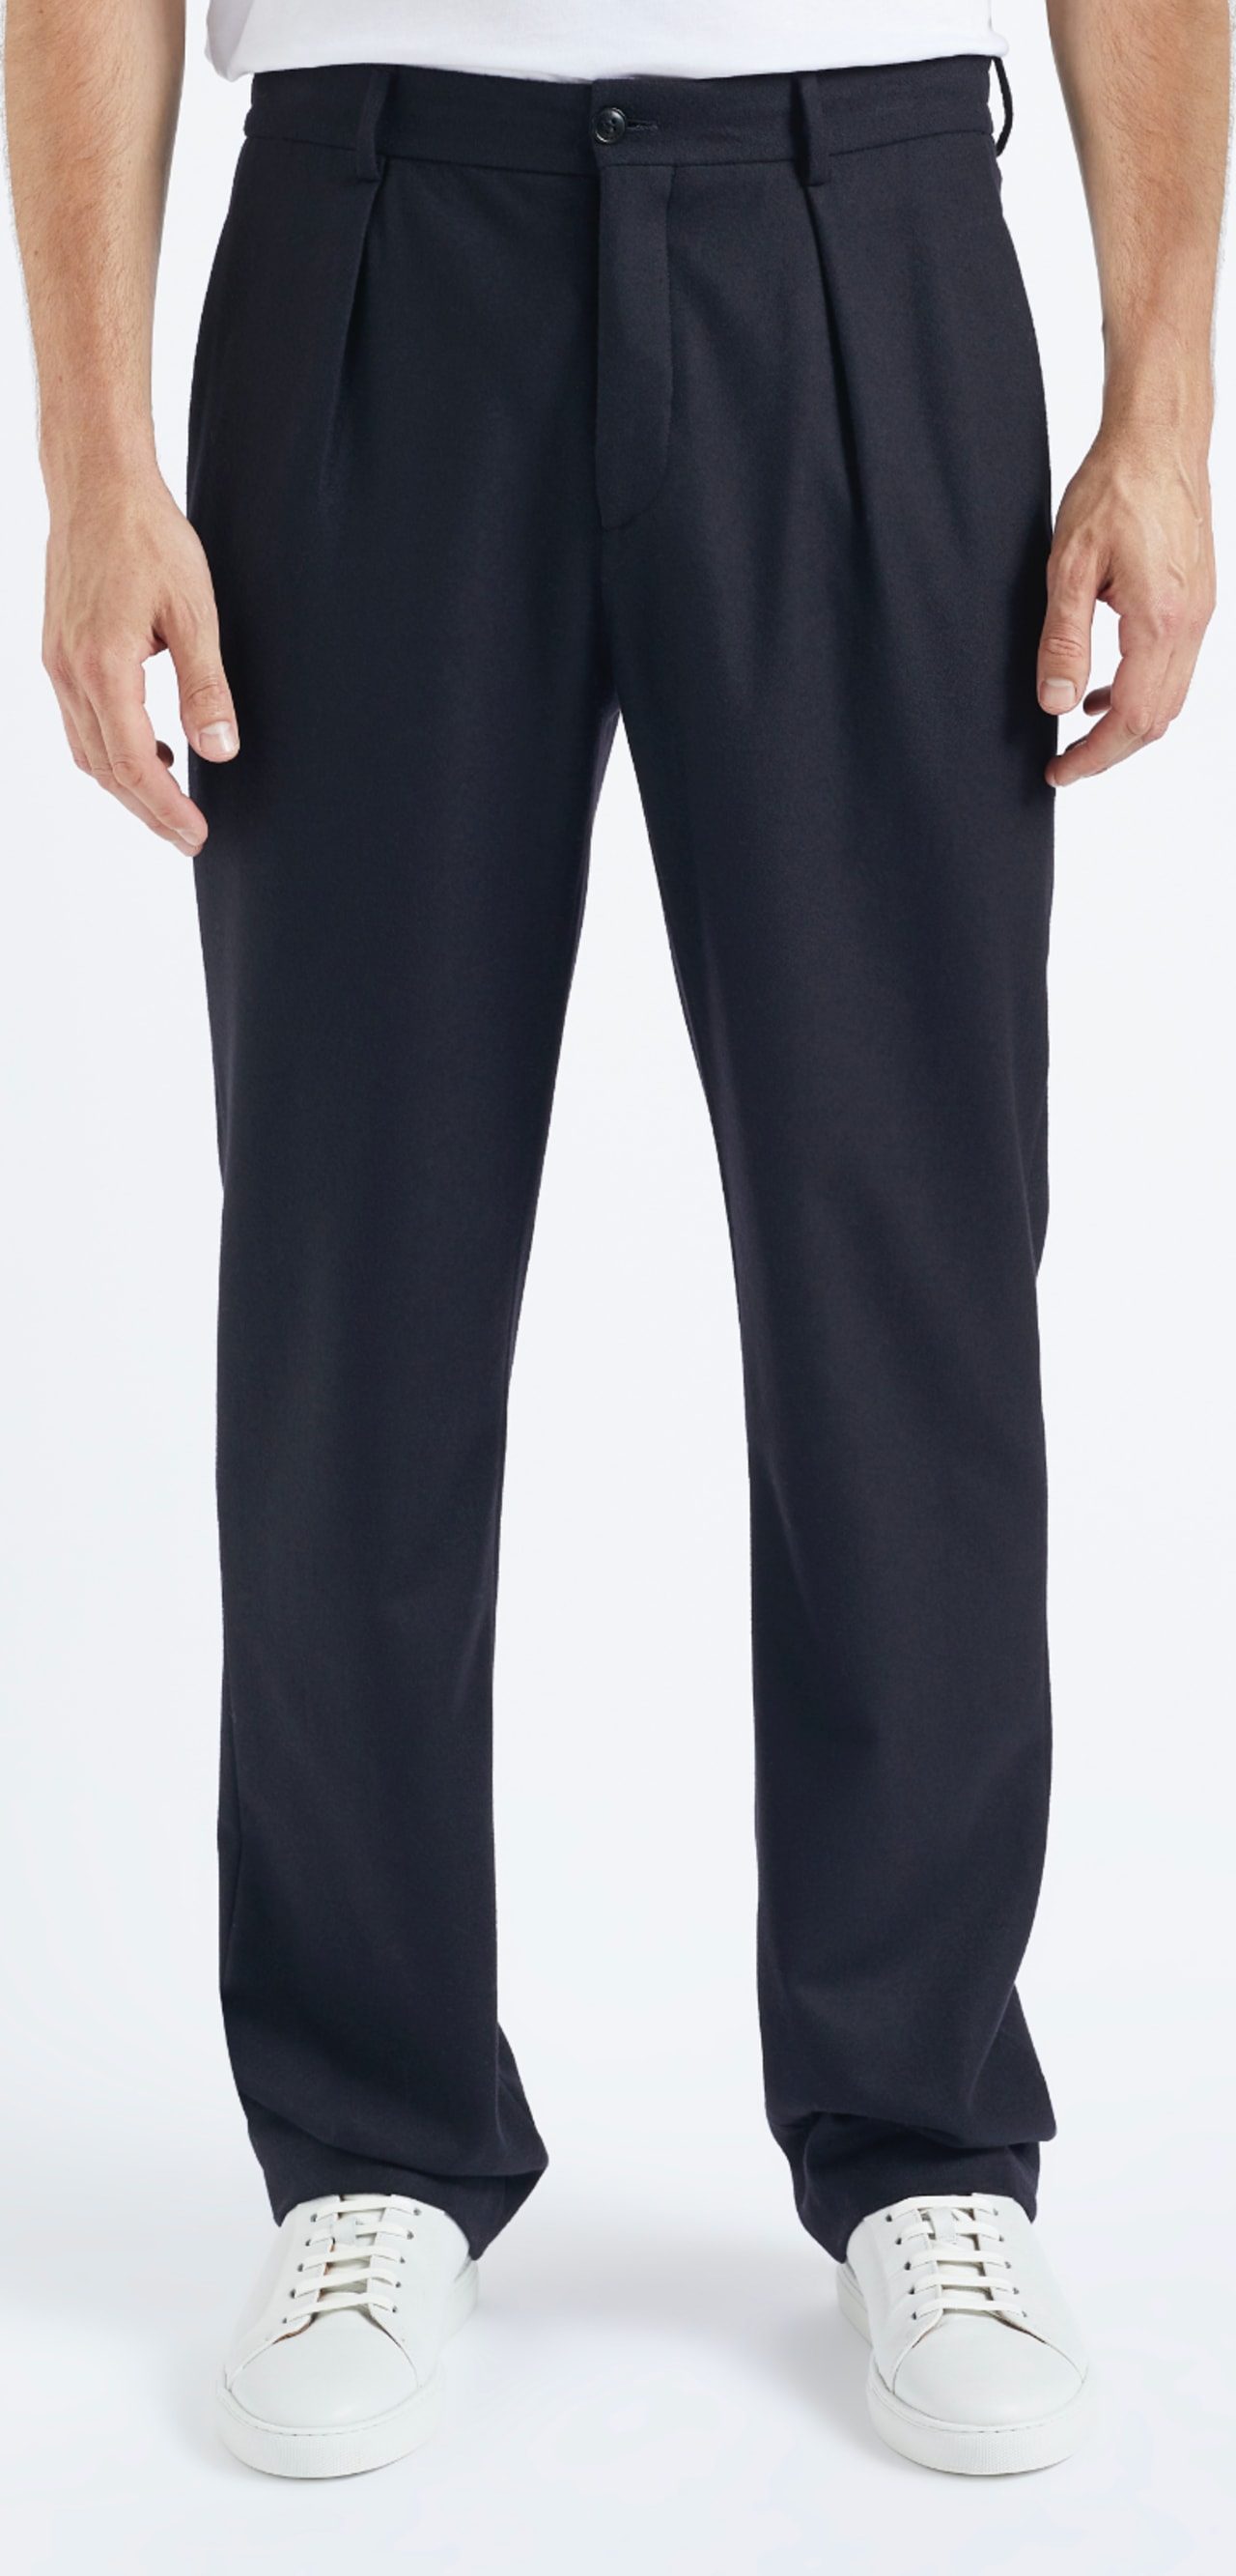 Irvine fit trousers